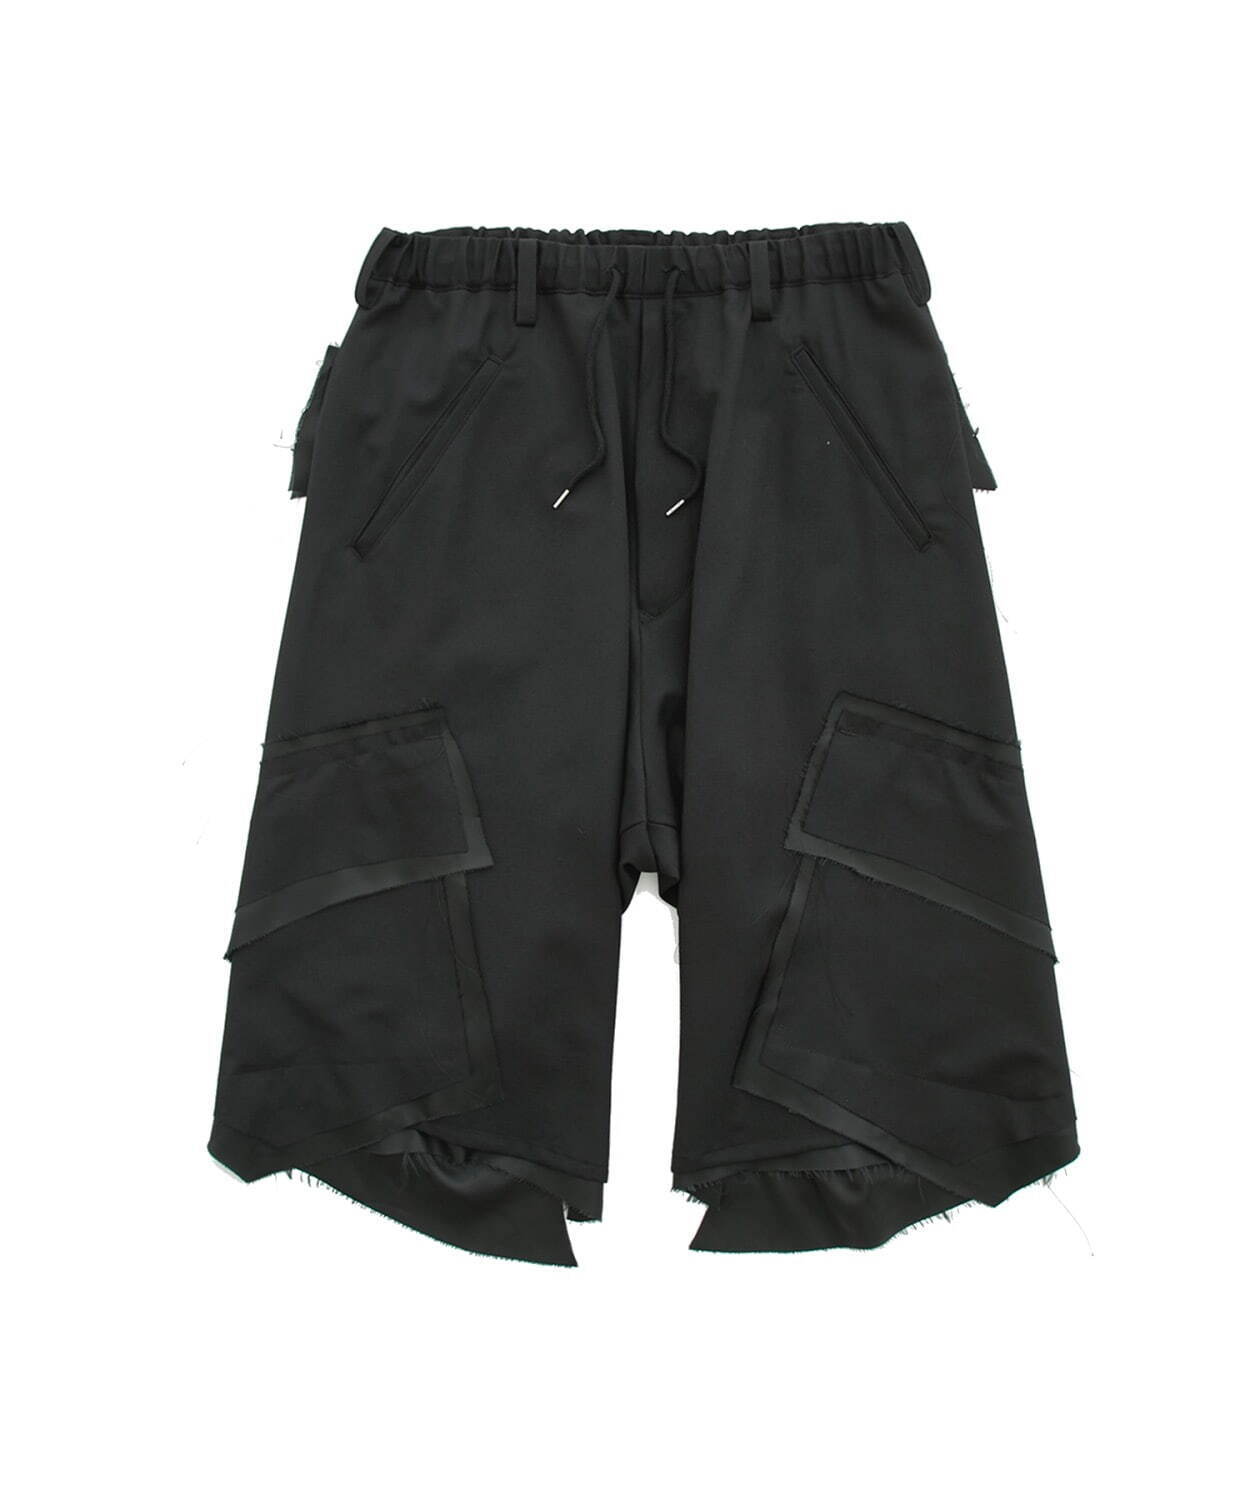 EX.EASY WIDE SHORTS 50,600円